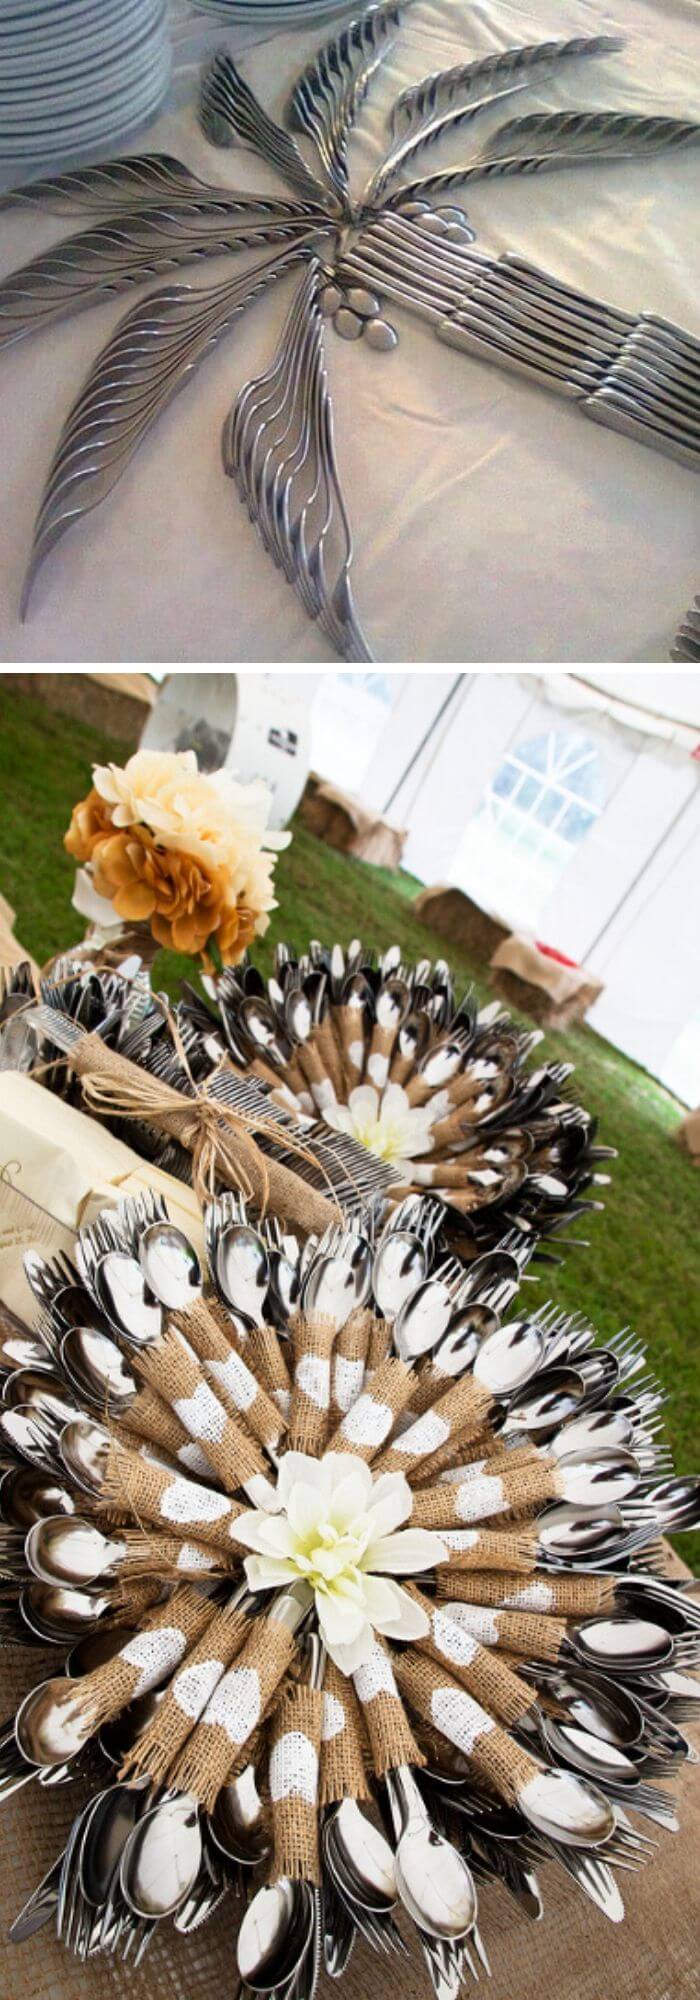 Recycled silverware